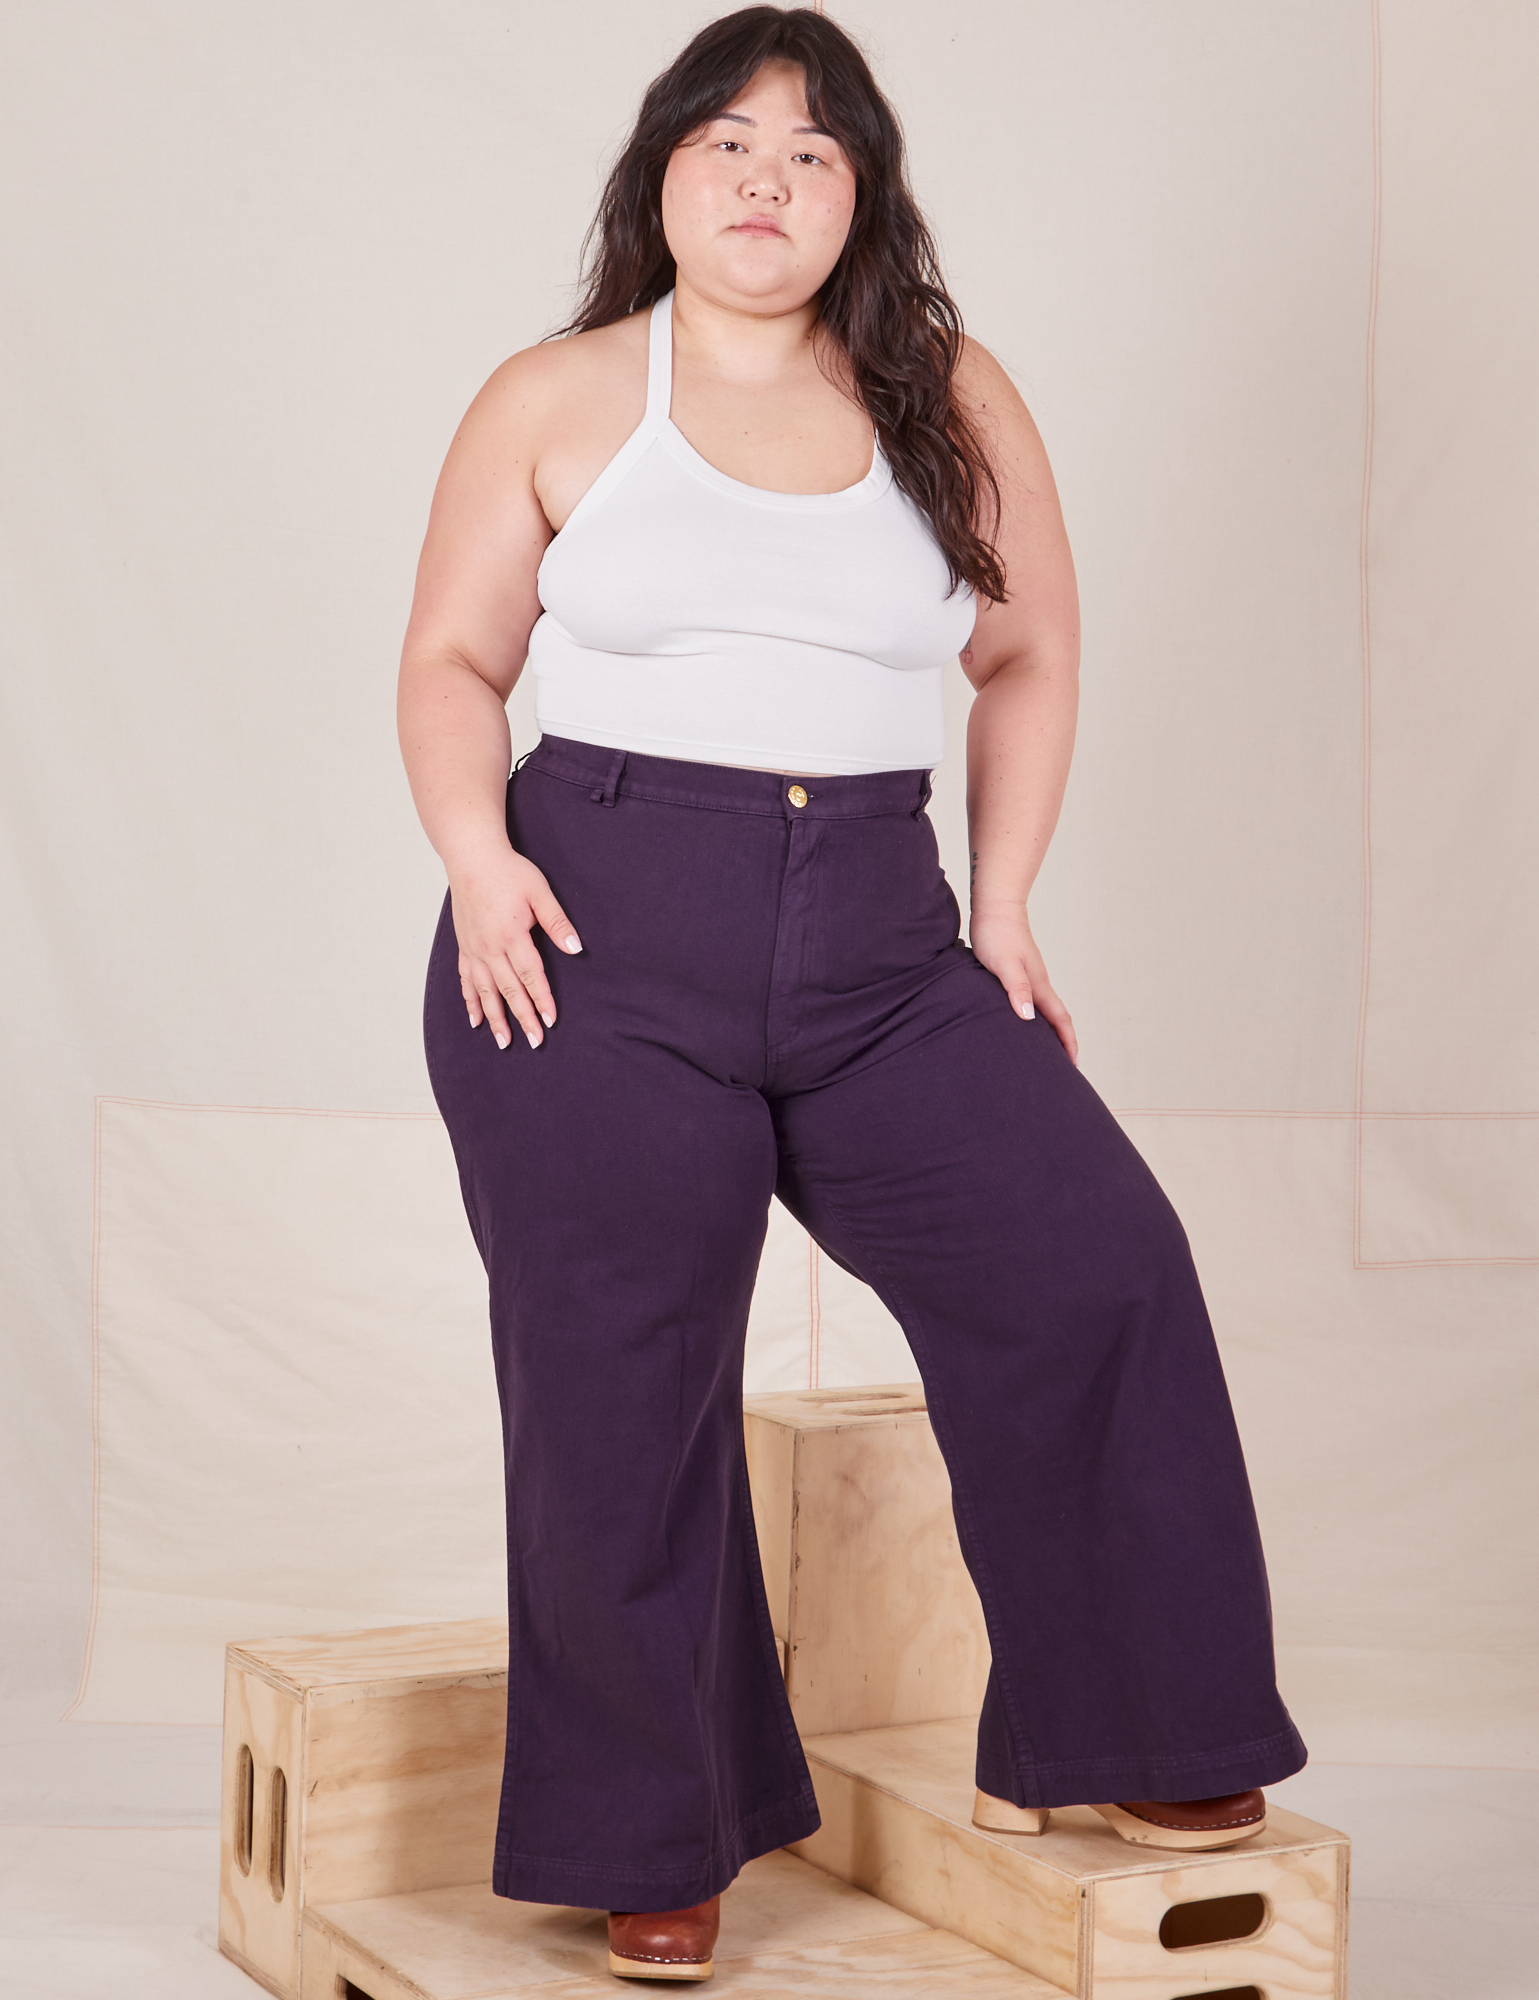 Ashley is 5'7" and wearing 1XL Bell Bottoms in Nebula Purple paired with Halter Top in vintage tee off-white